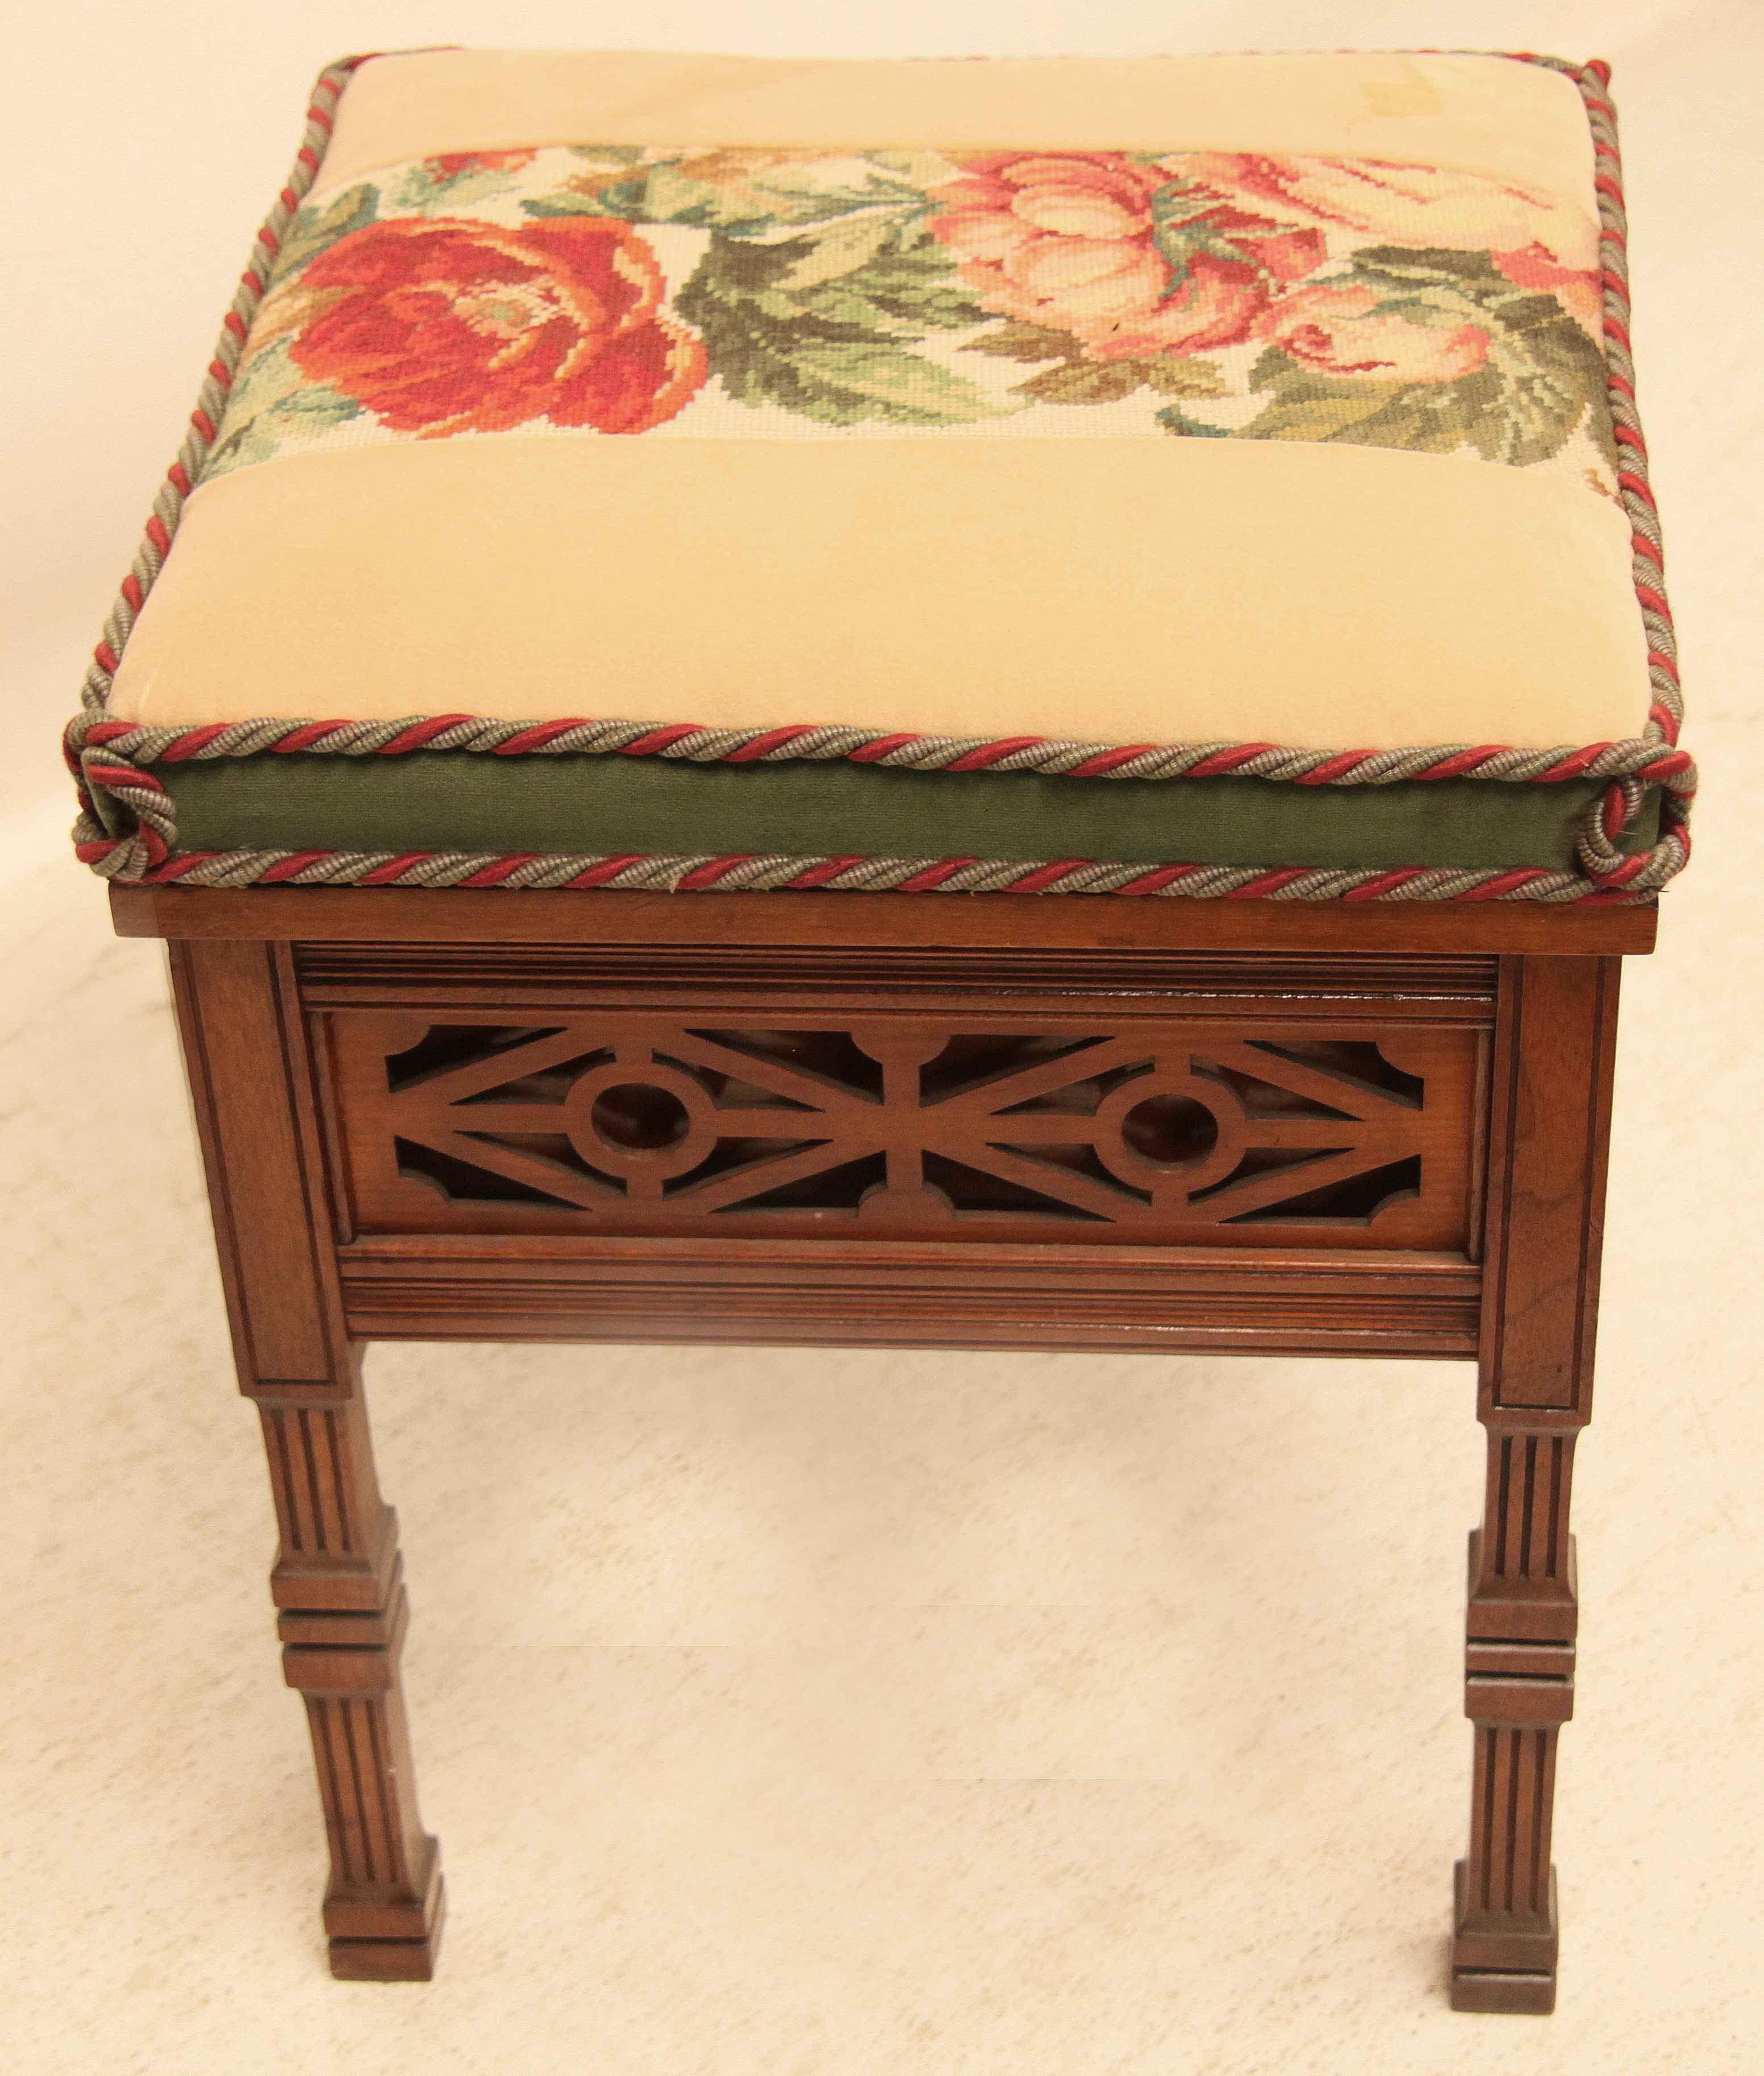 English Edwardian Lift Top Stool For Sale